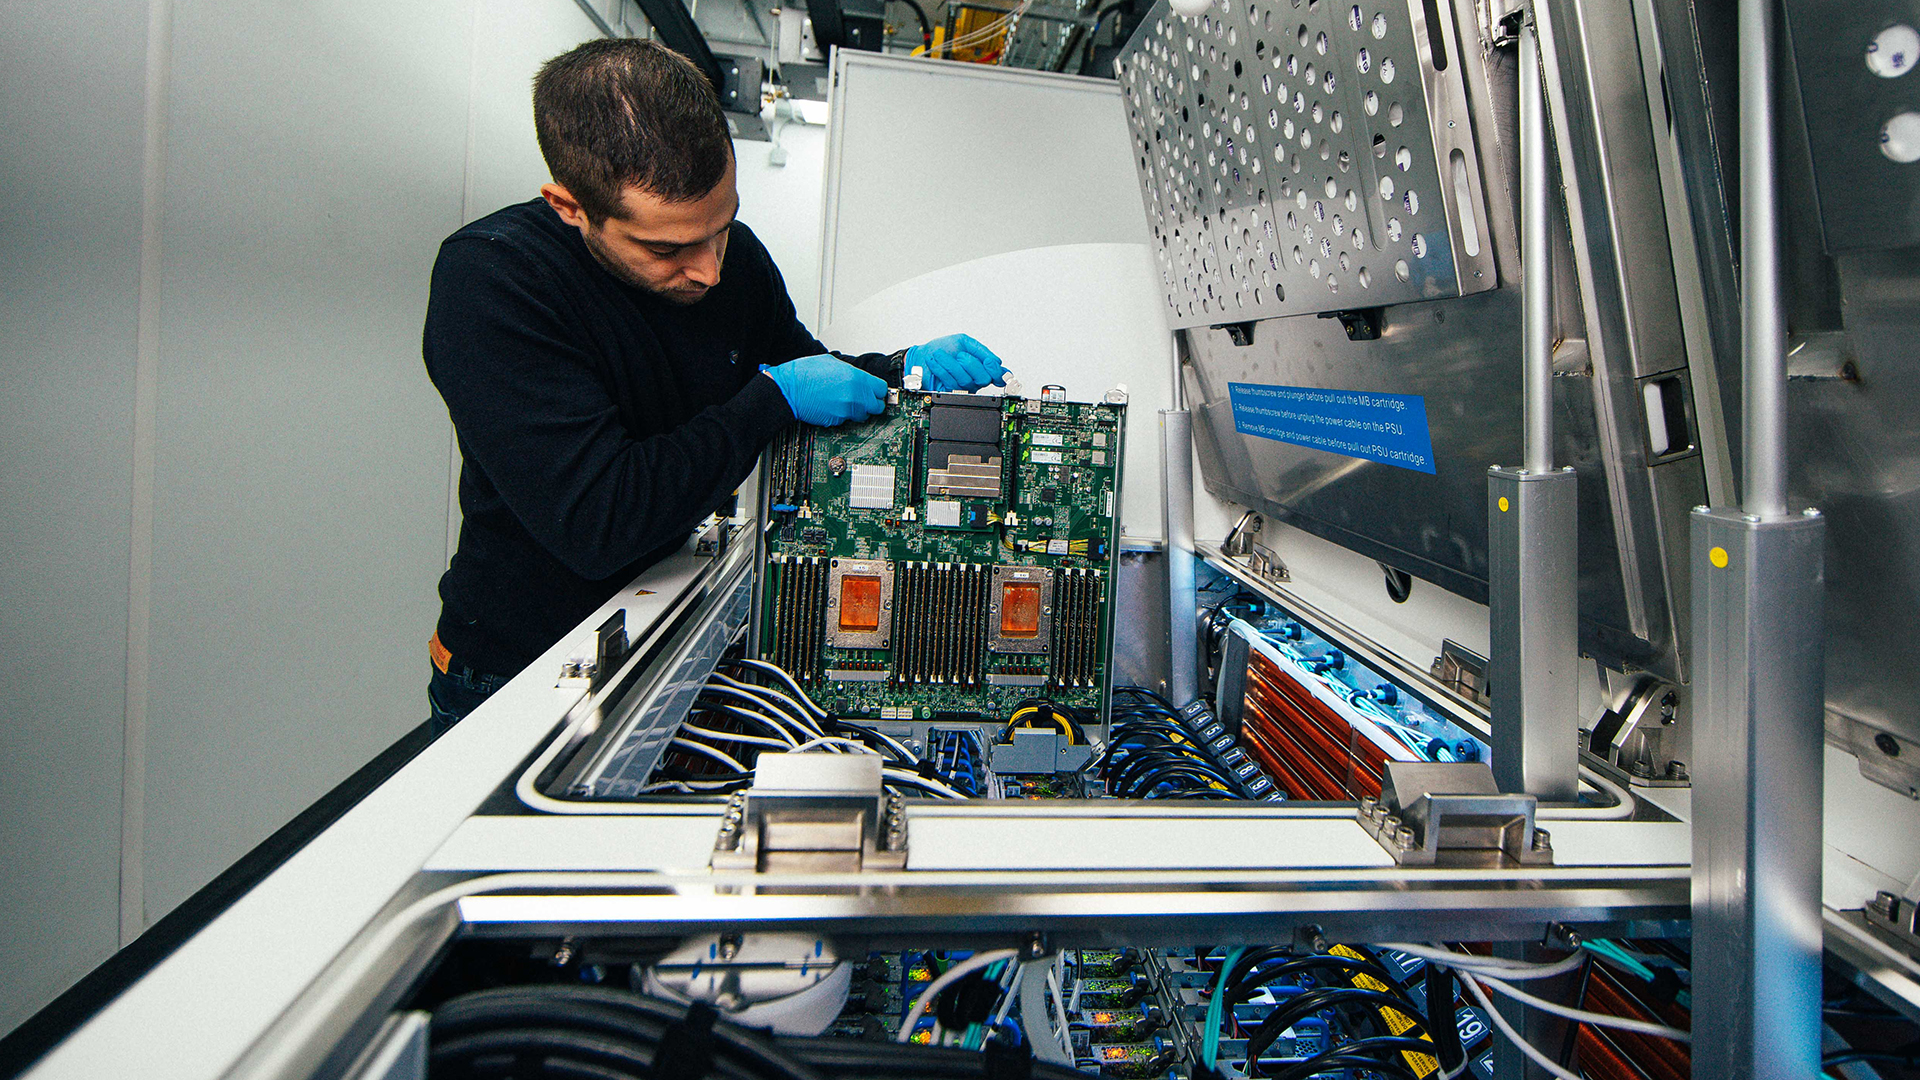 Ioannis Manousakis removes a server blade from a two-phase immersion cooling tank